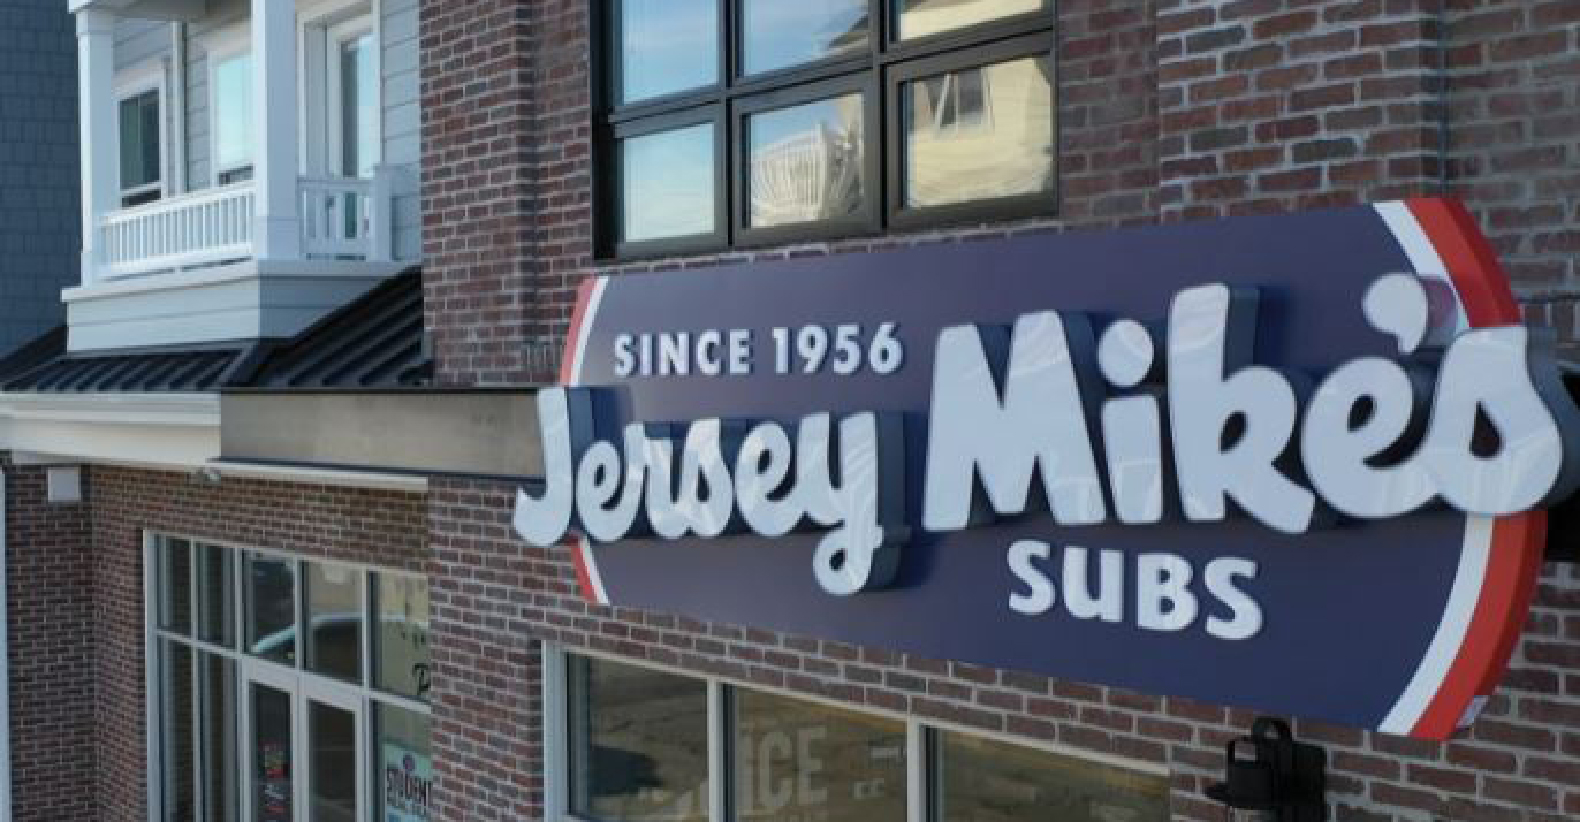 Introducing Aaron's Way in honor of - Jersey Mike's Subs